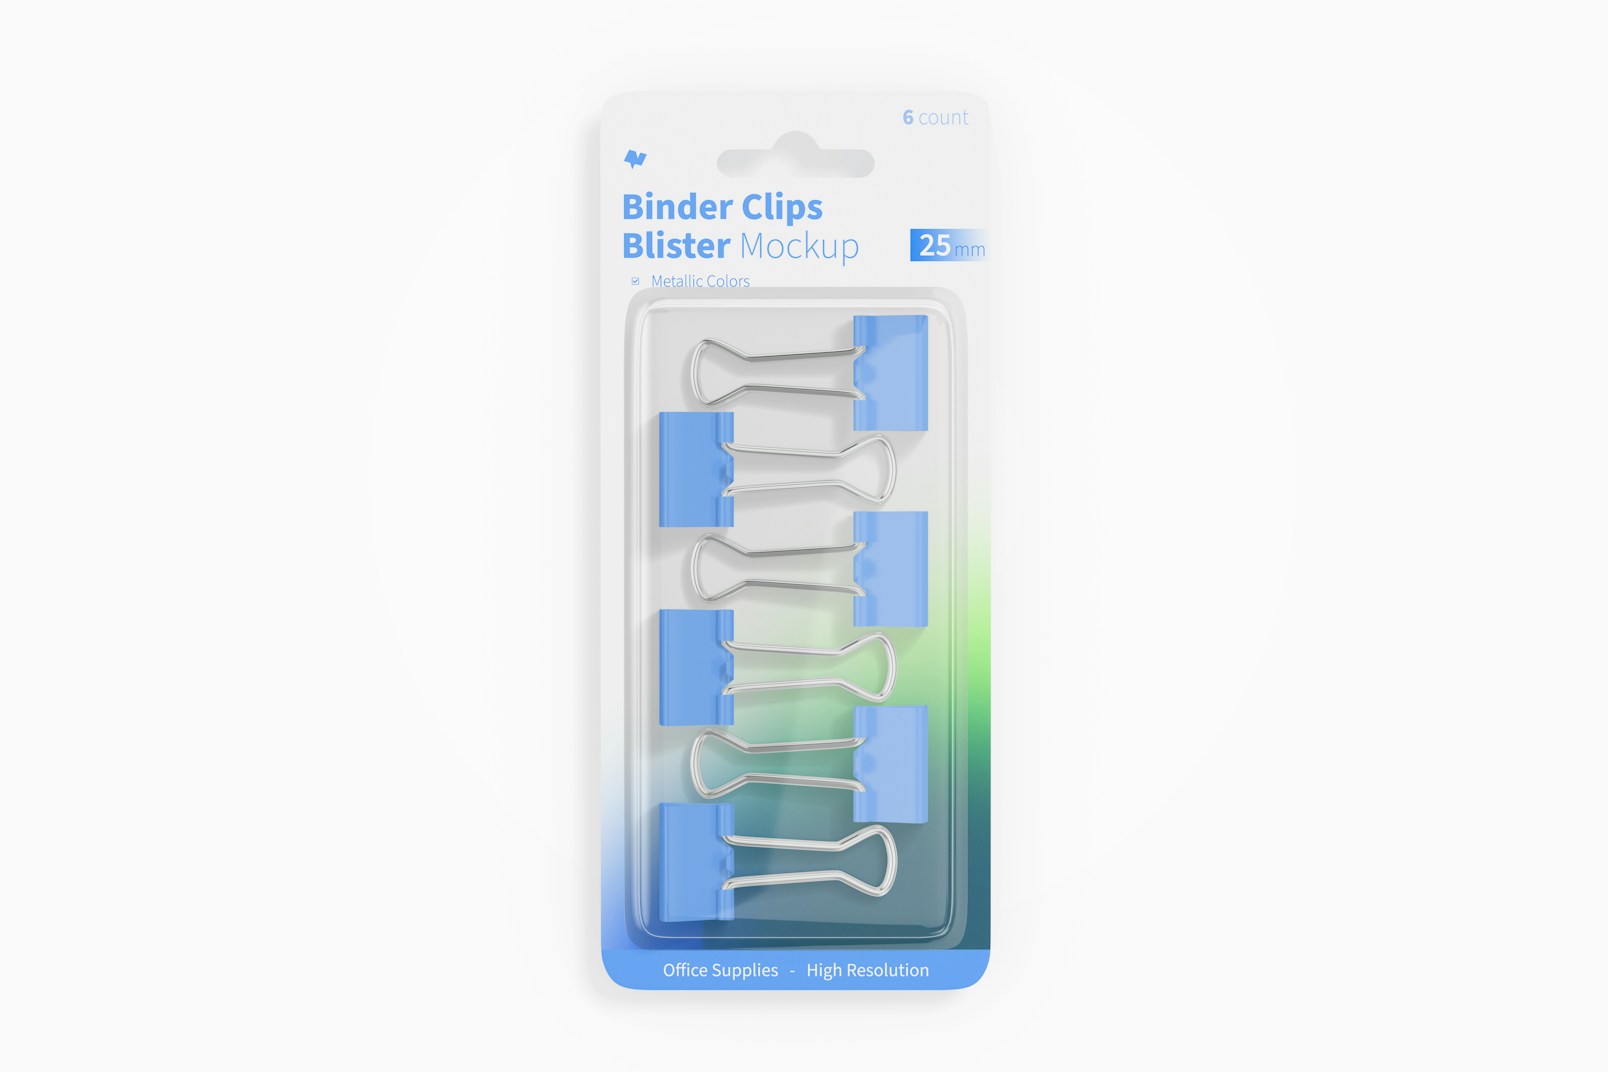 Binder Clips Blister Mockup, Top View